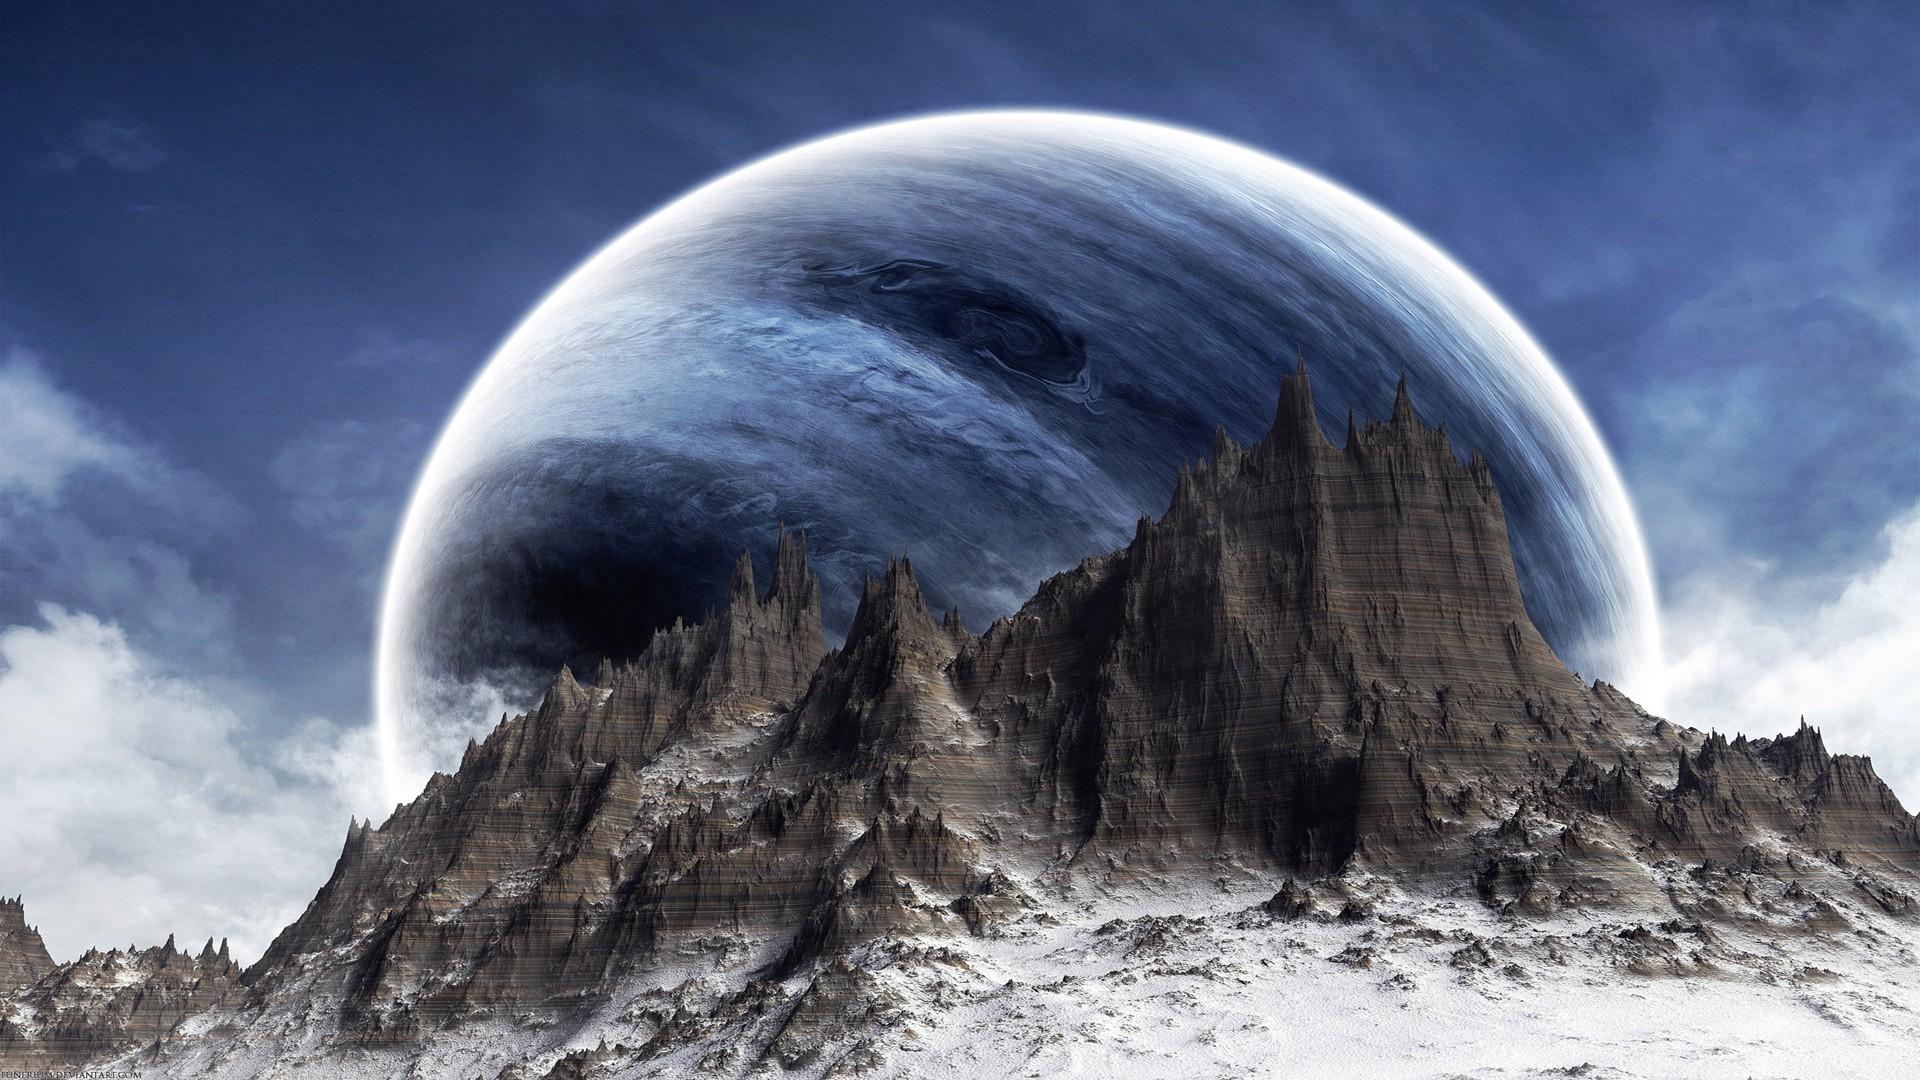 Fantasy art mountains outer space planets wallpaper. AllWallpaper